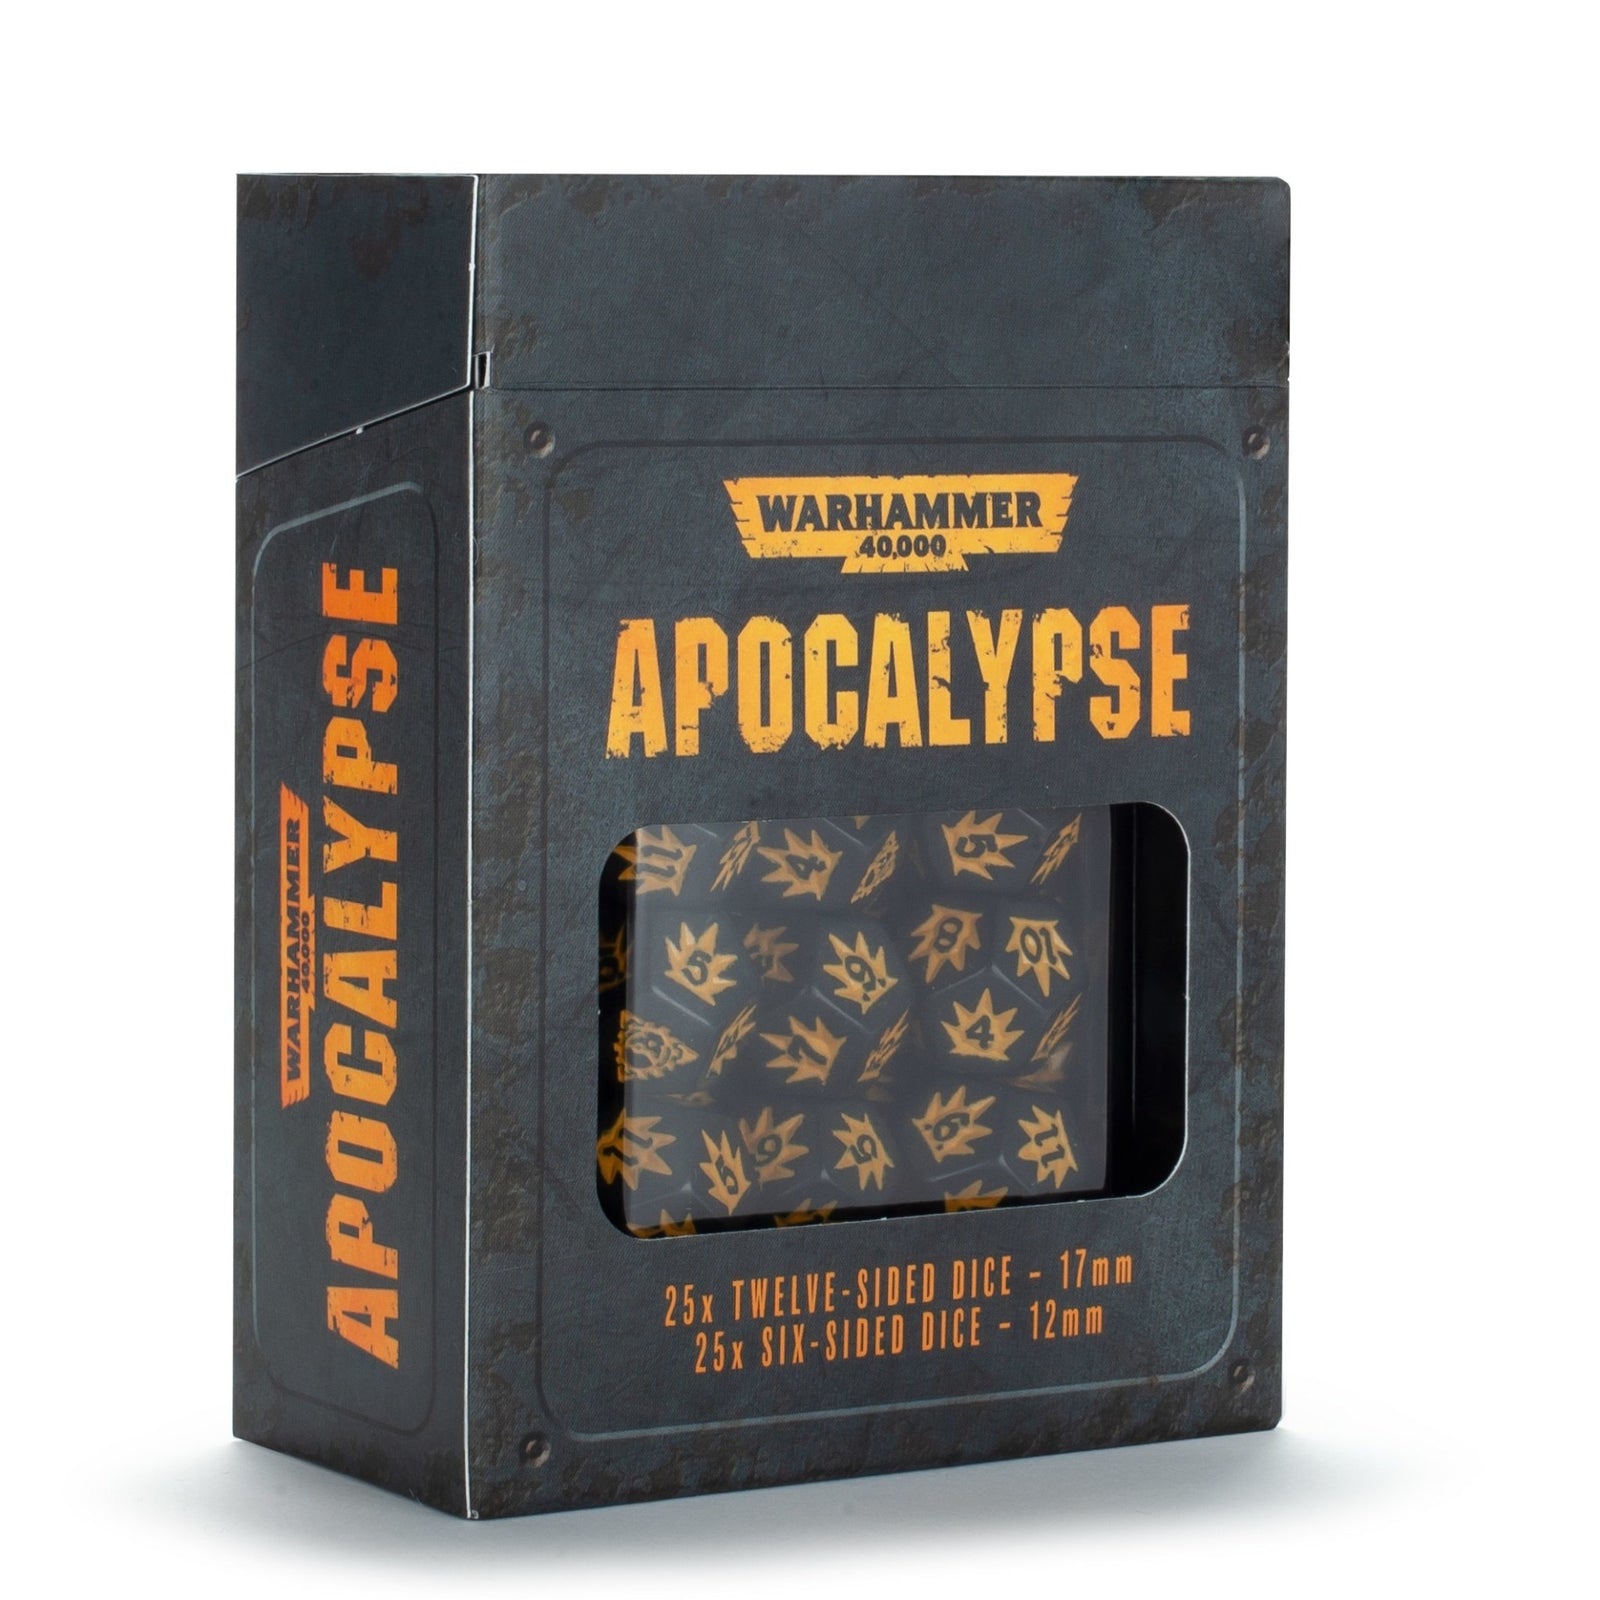 Packaging for Warhammer 40,000 Apocalypse Dice Set